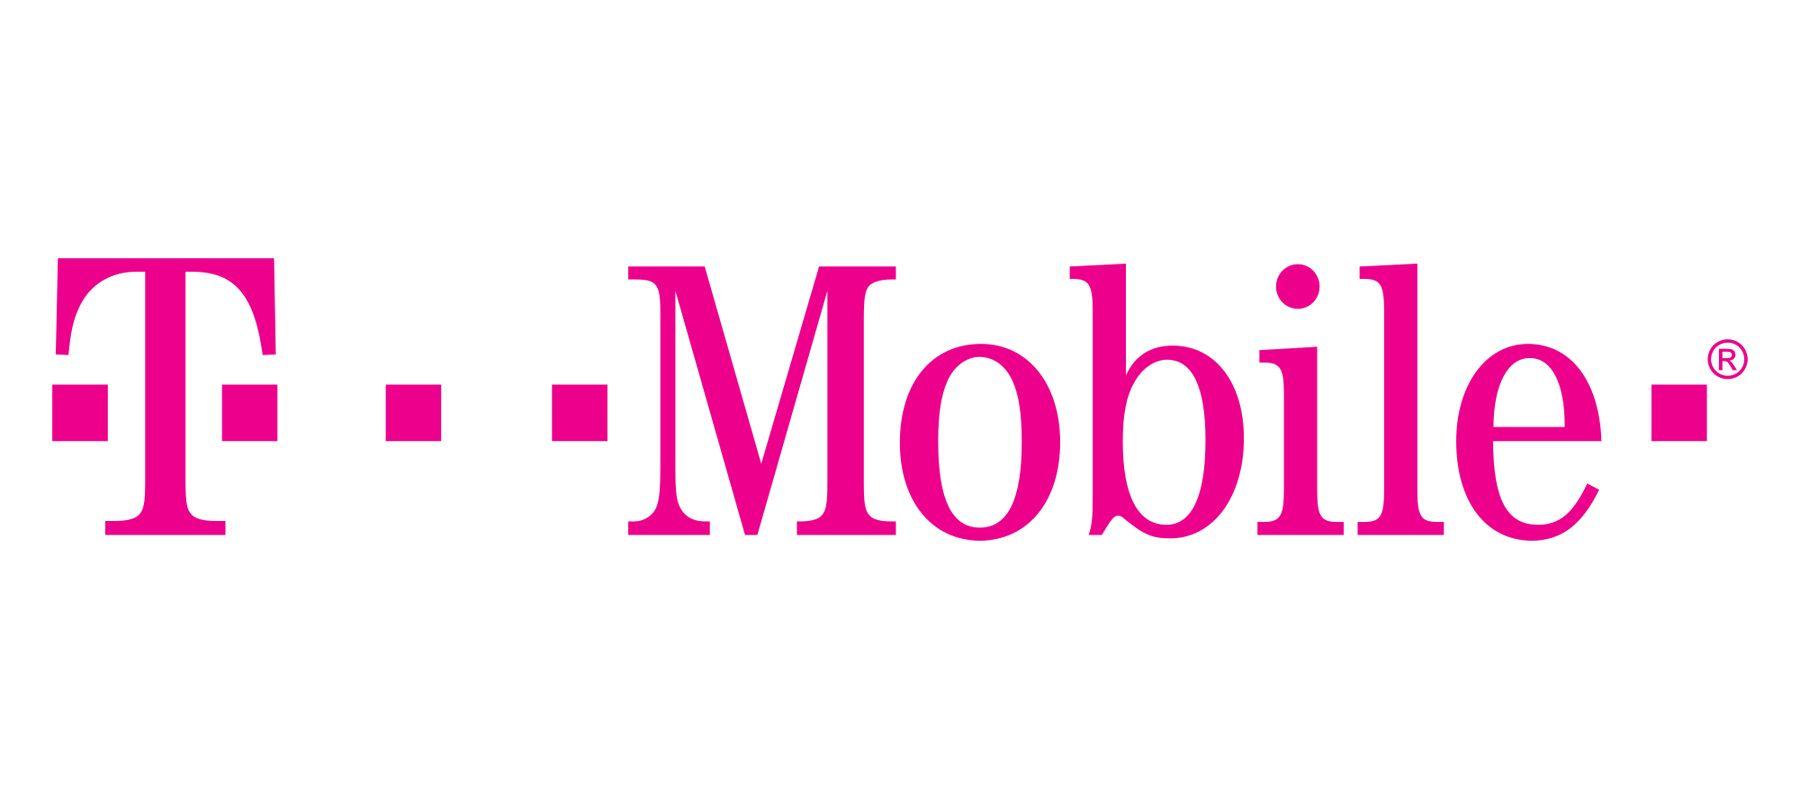 Modern Mobile Logo - T Mobile Logo, T Mobile Symbol, Meaning, History And Evolution